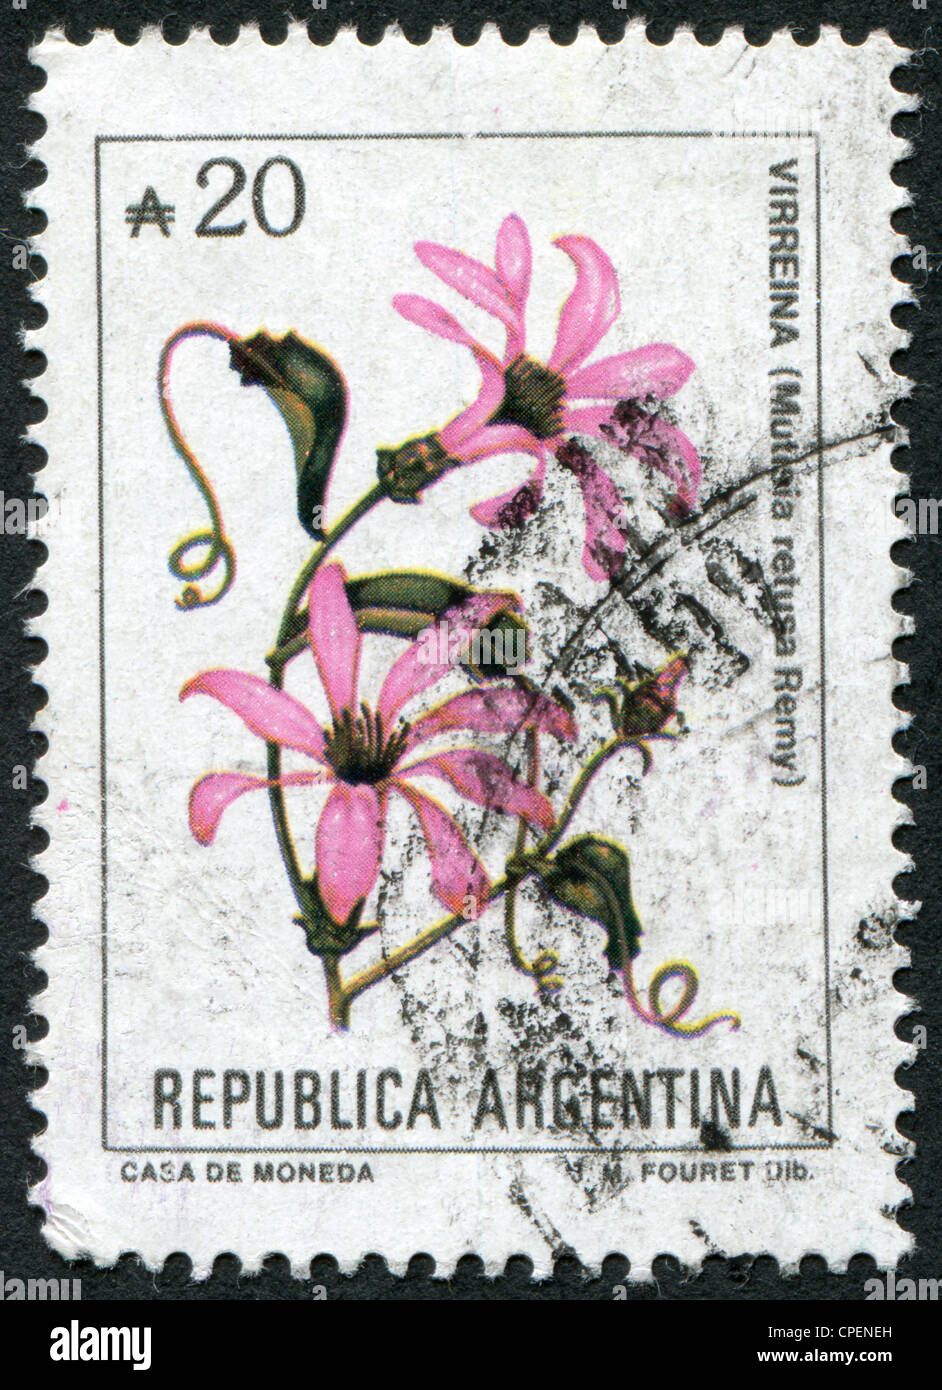 ARGENTINA - CIRCA 1983: A stamp printed in the Argentina, depicts a flower Mutisia retusa Remy, circa 1983 Stock Photo